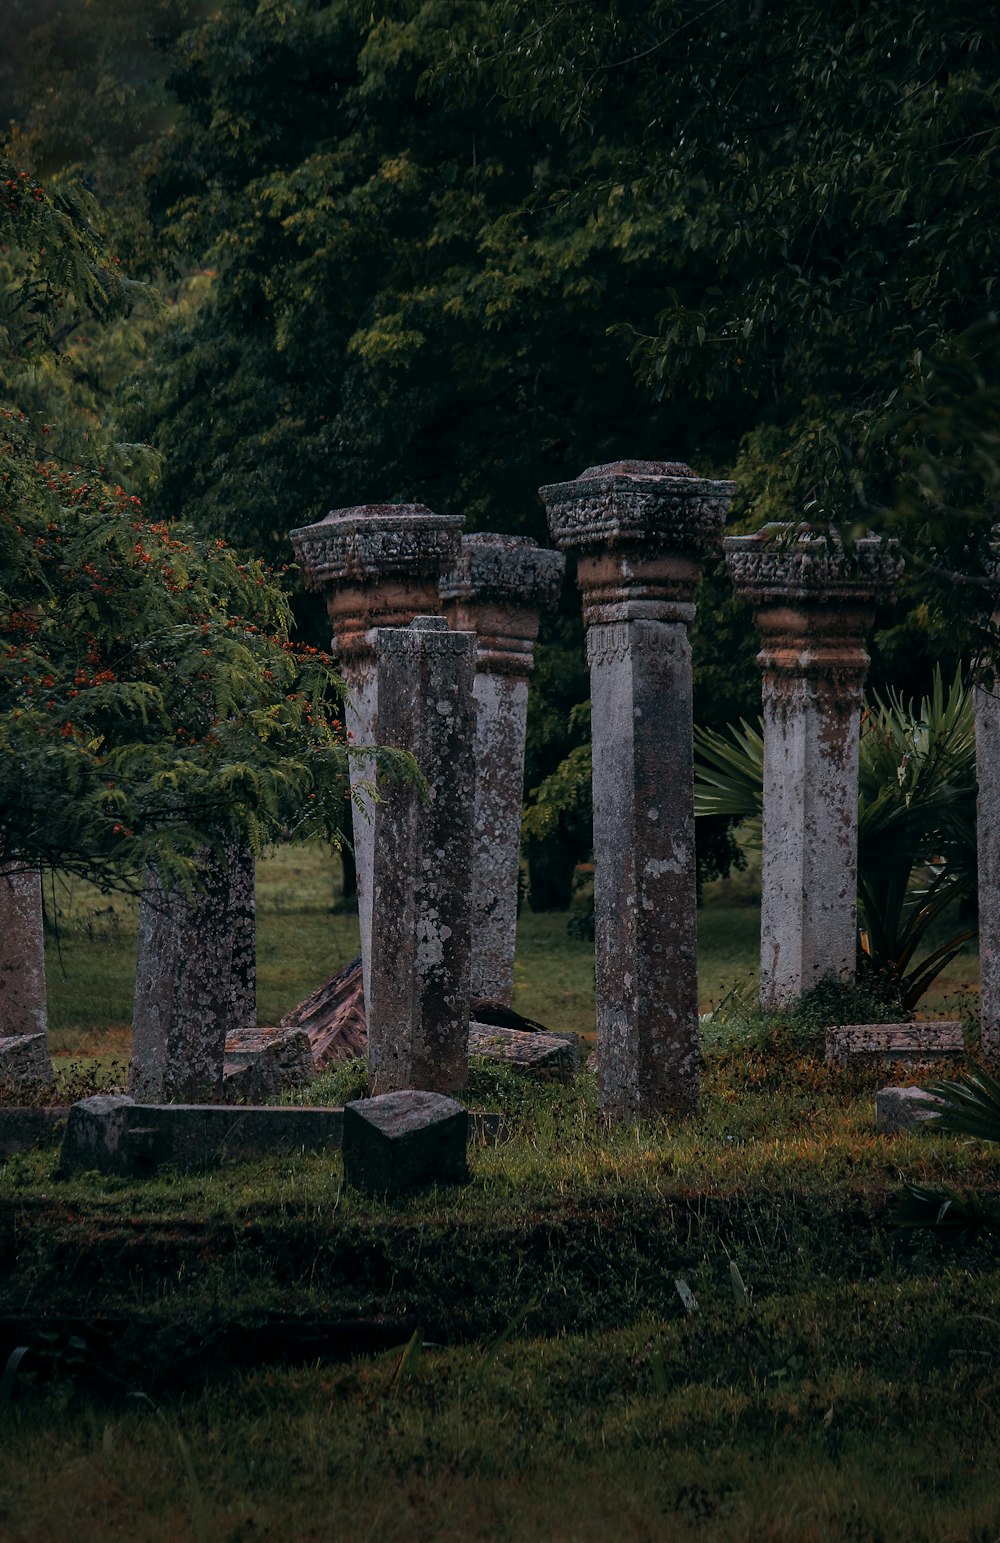 a group of stone pillars in a grassy area with trees in the background